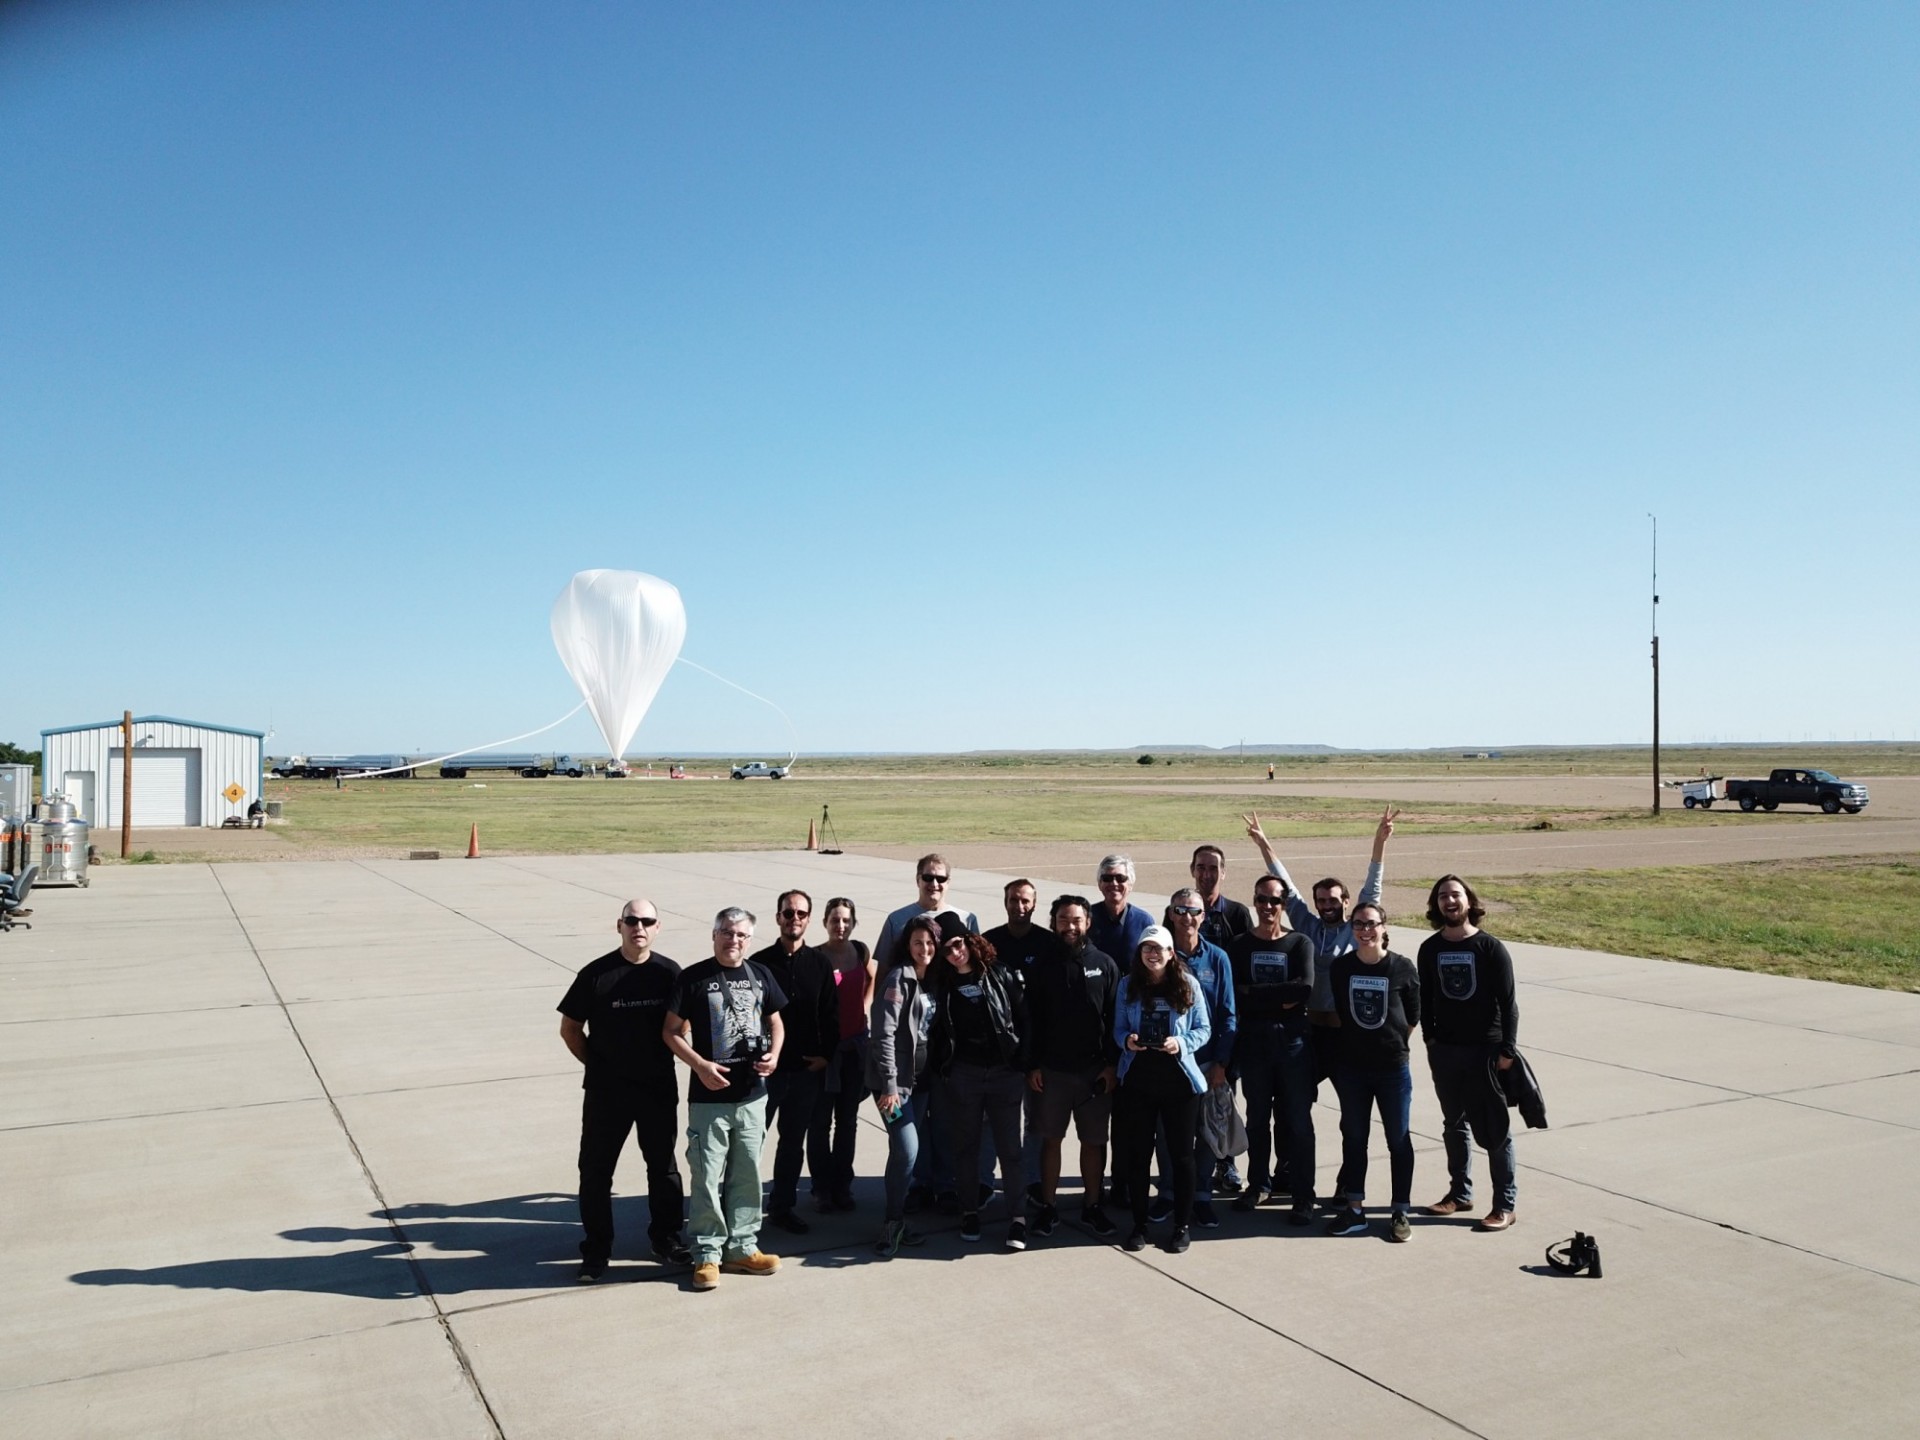 FIREBall team in front of our balloon during the 2018 launch.